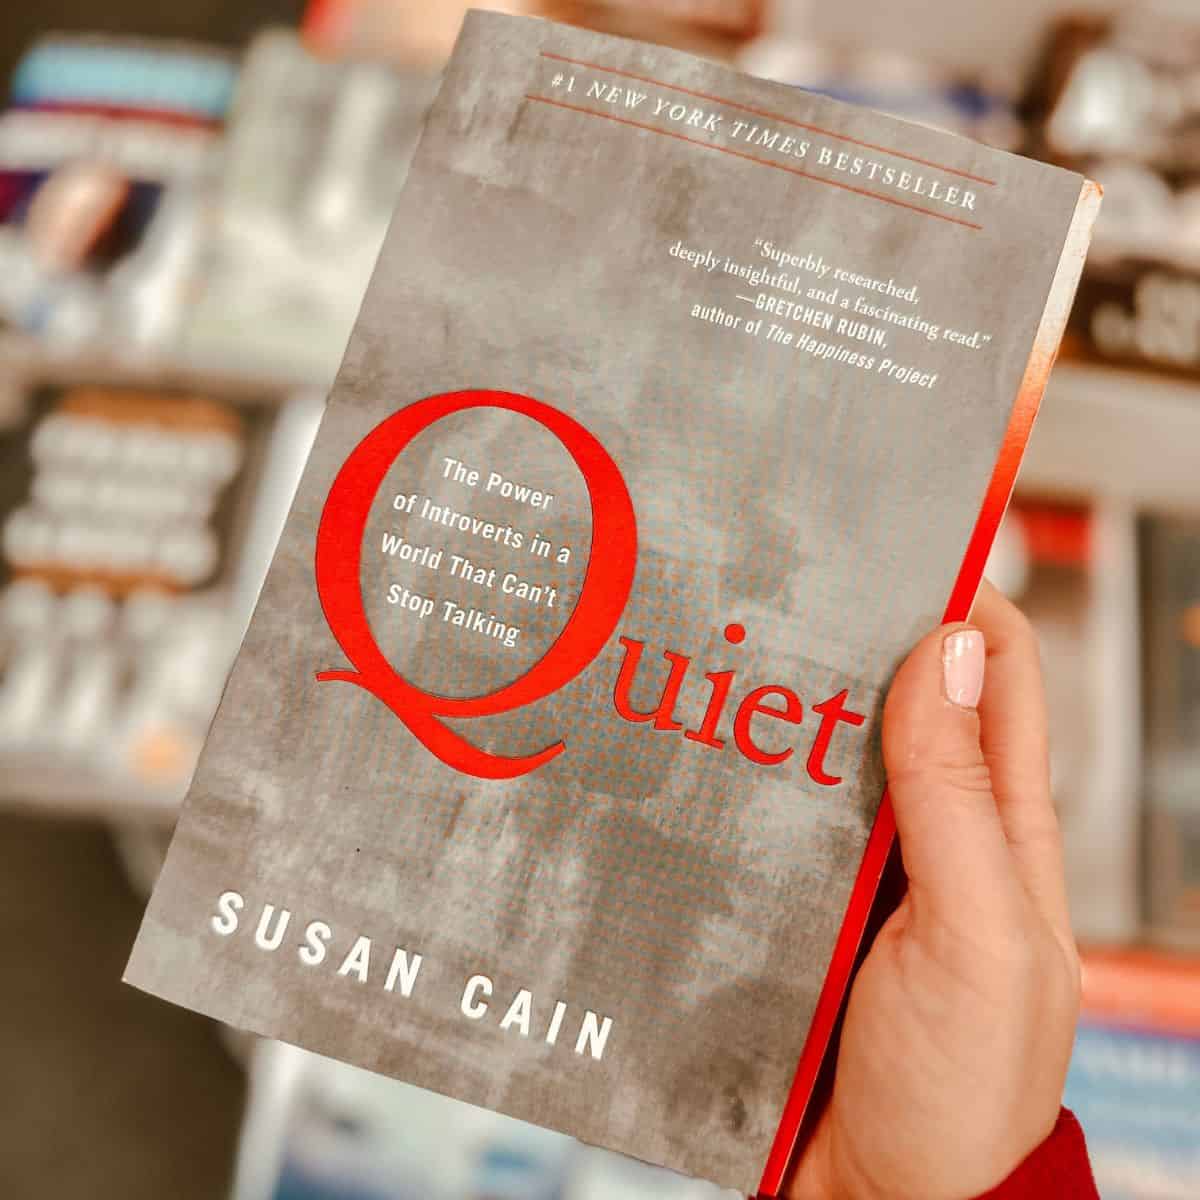 Quiet (Book for Introverts): Full Review with Quotes